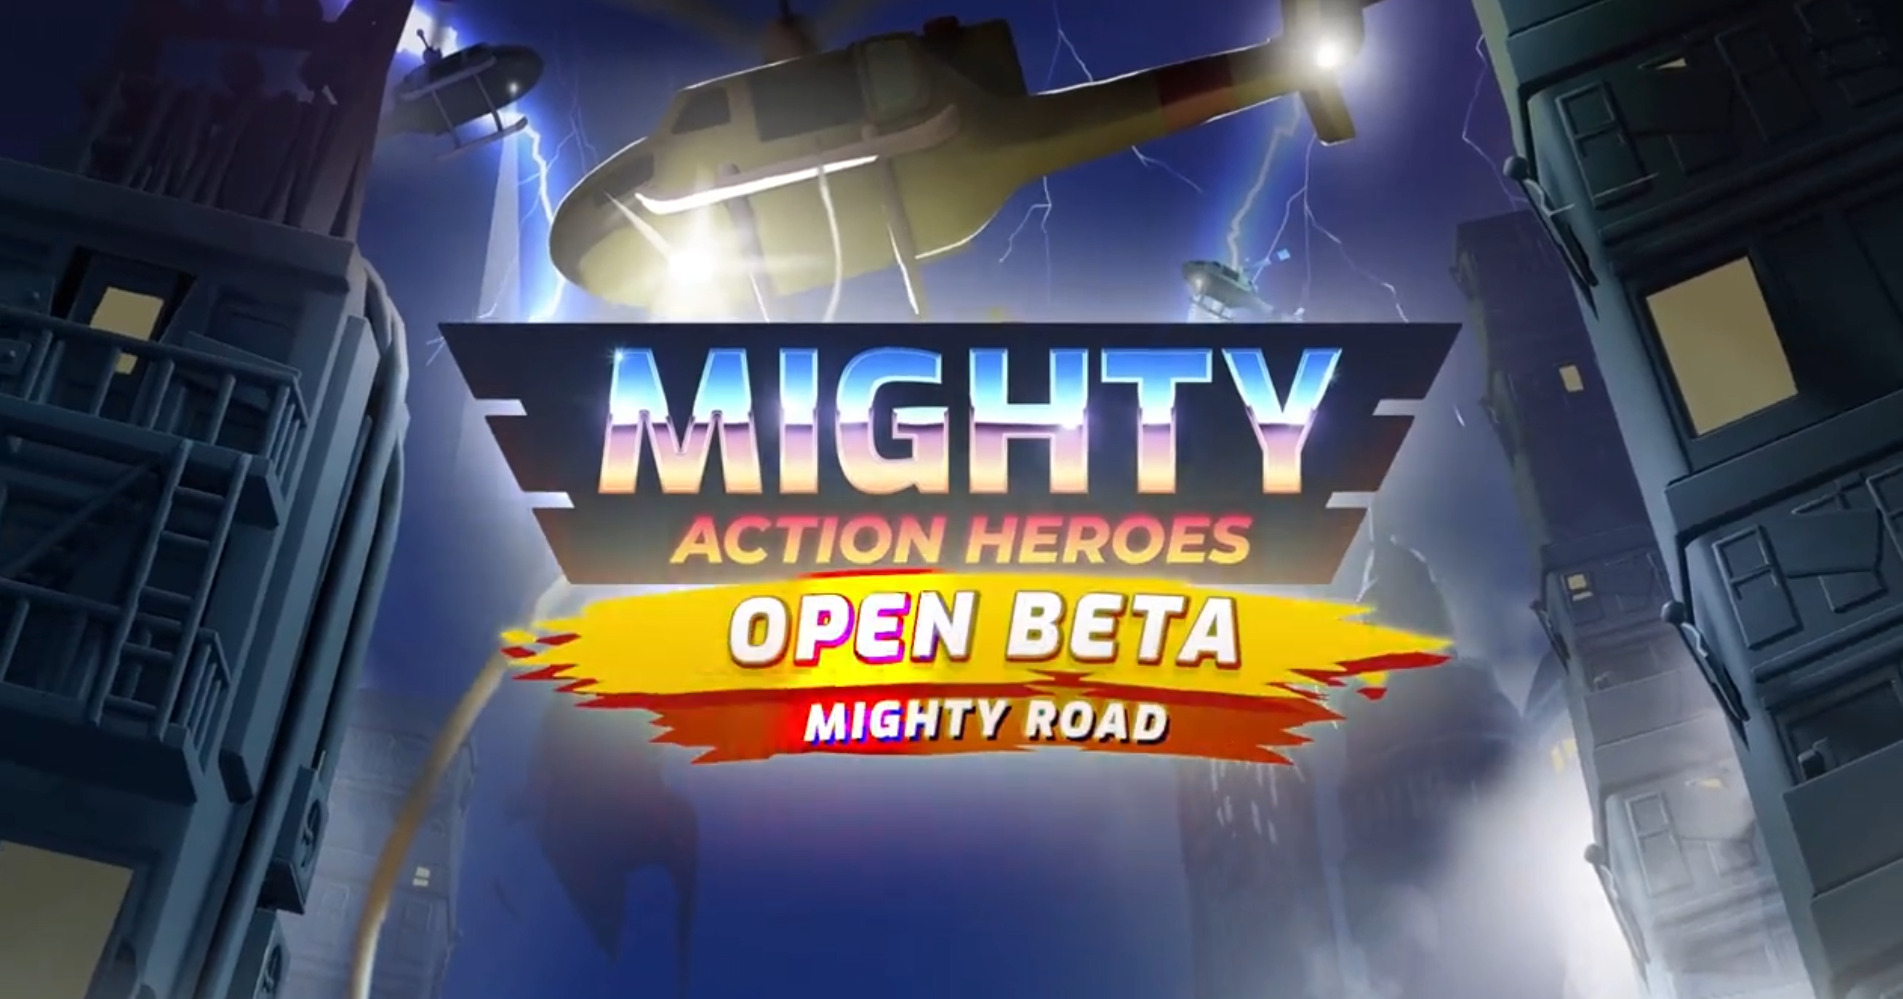 Mighty Action Heroes Mighty Road banner